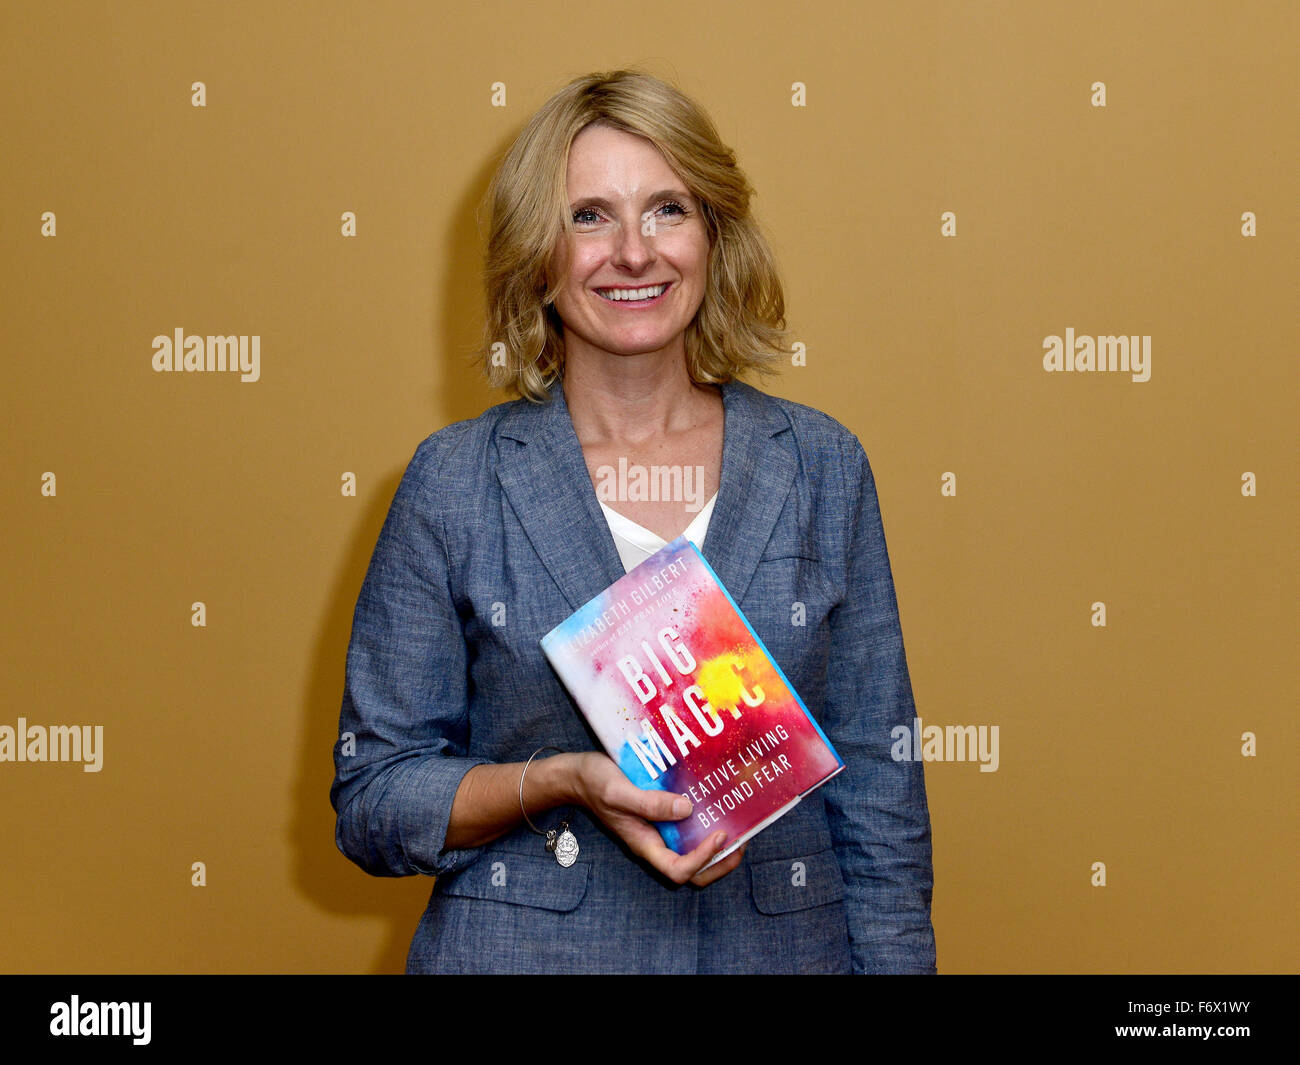 'Eat Pray Love' author Elizabeth Gilbert speaks and reads from her new book 'Big Magic' presented by Books and Books at the James L Knight Concert Hall at Adrienne Arsht Center  Featuring: Elizabeth Gilbert Where: Miami, Florida, United States When: 20 Oc Stock Photo